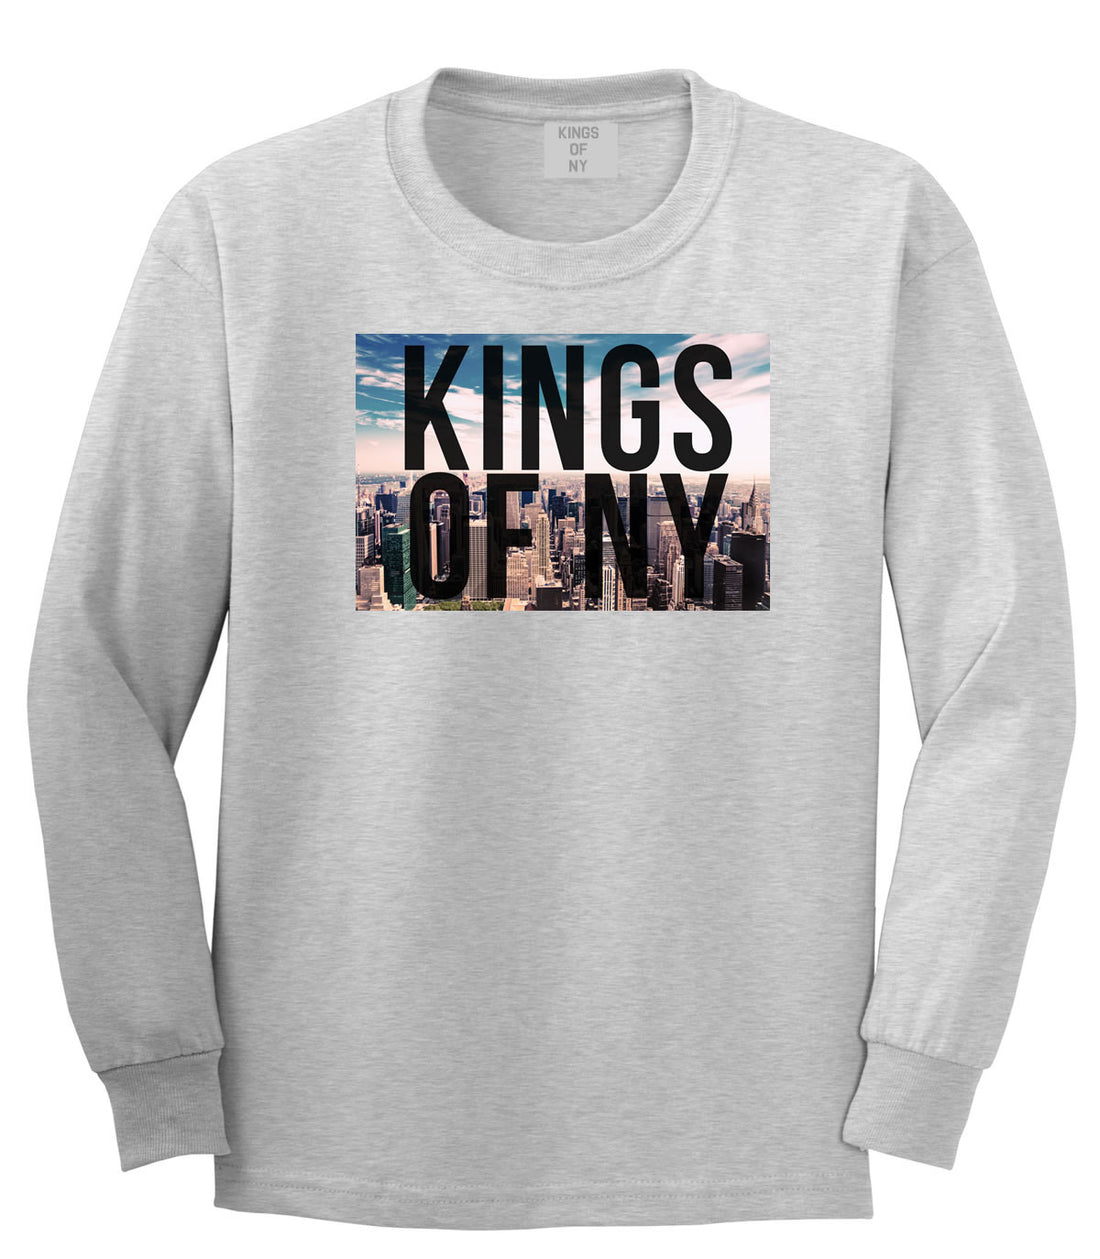 New York Skyline Long Sleeve T-Shirt in Grey by Kings Of NY